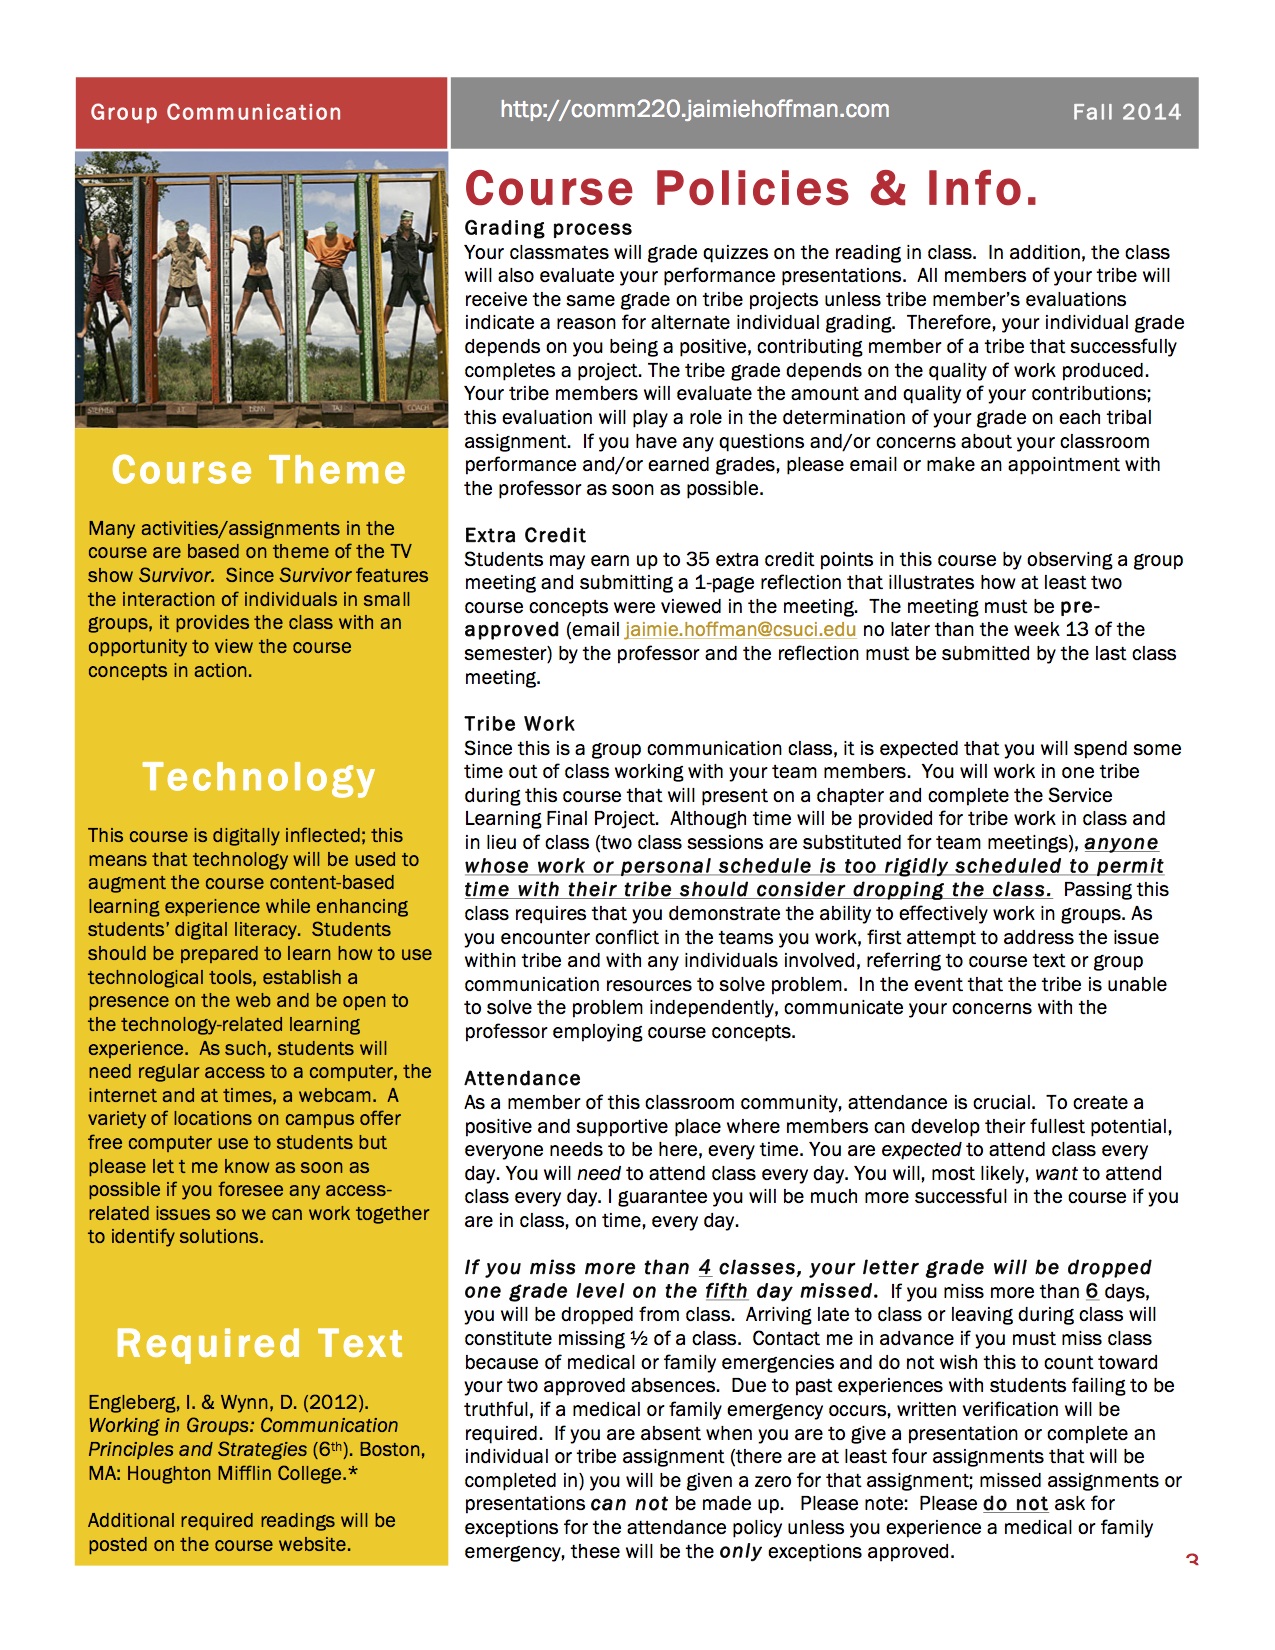 Page 3 Design_Course_Syllabus_Hoffman_COMM_220_Fall_2014